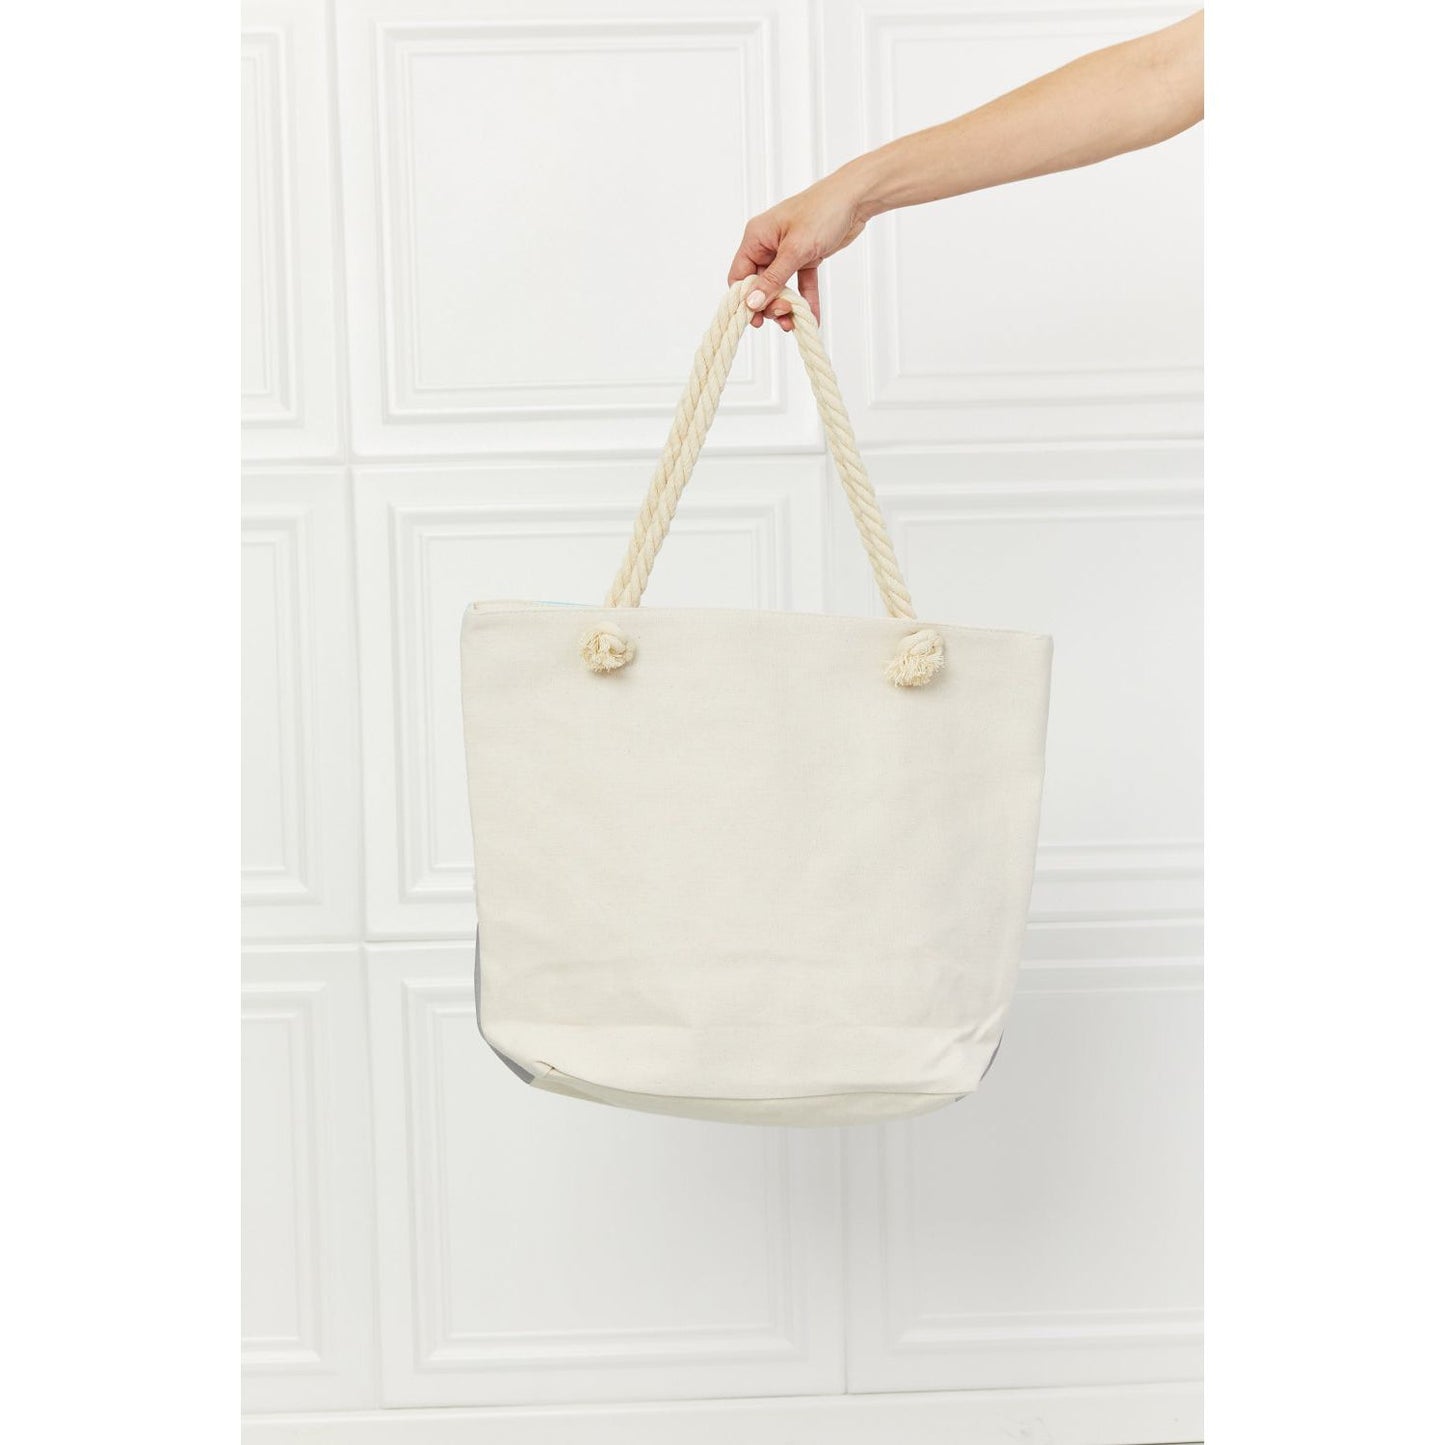 Justin Taylor In The Sand Tassle Tote Bag